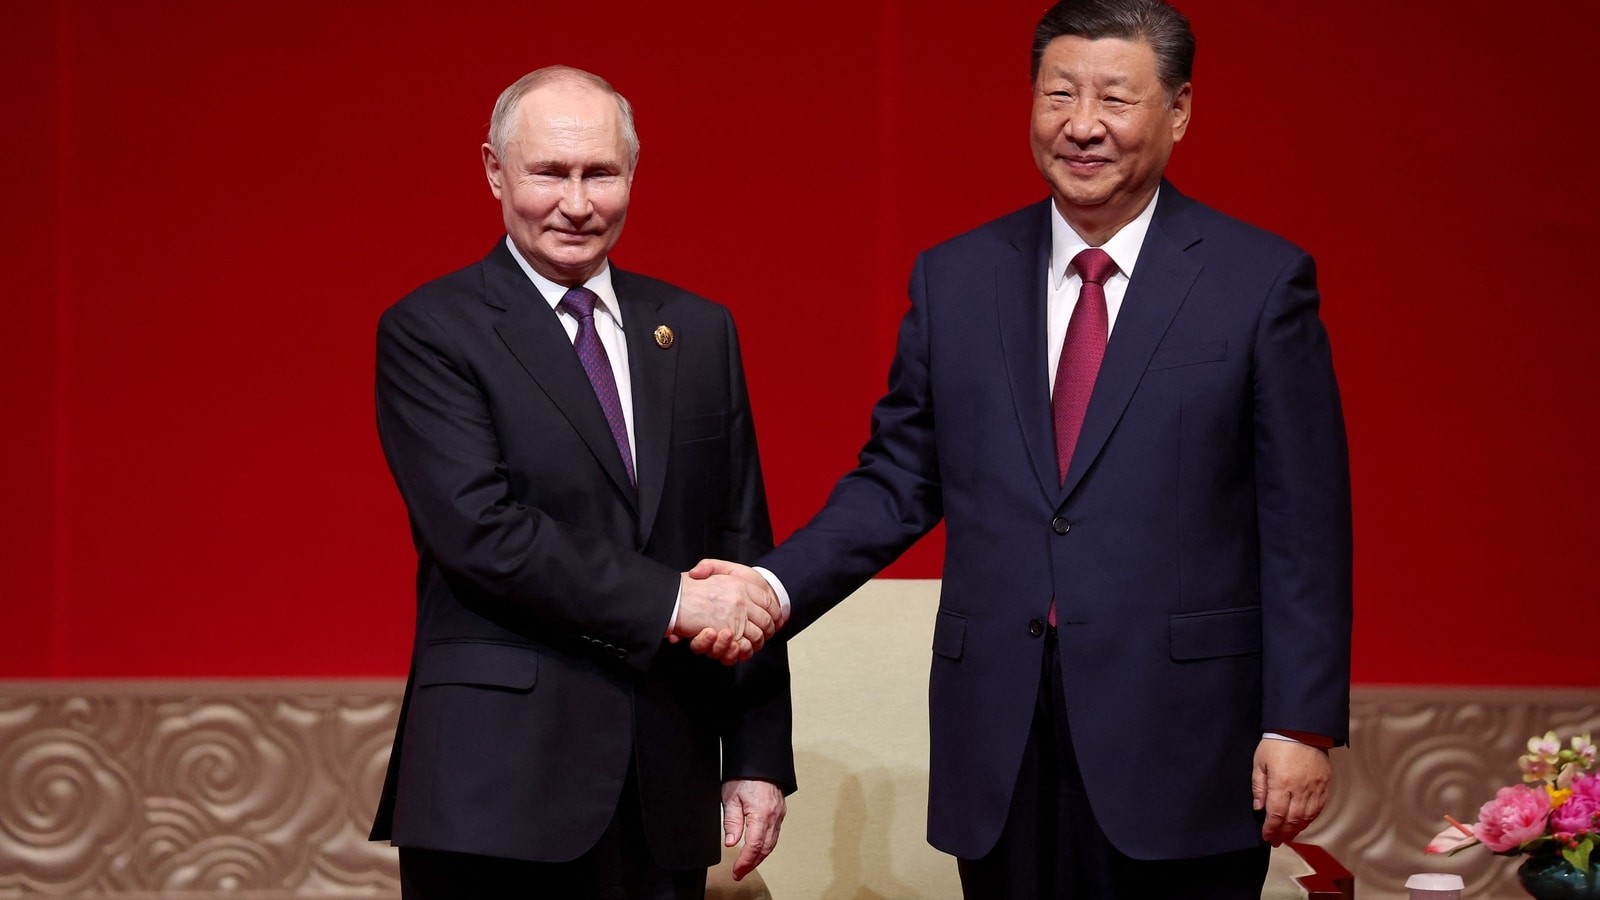 As Moscow gets close to Beijing